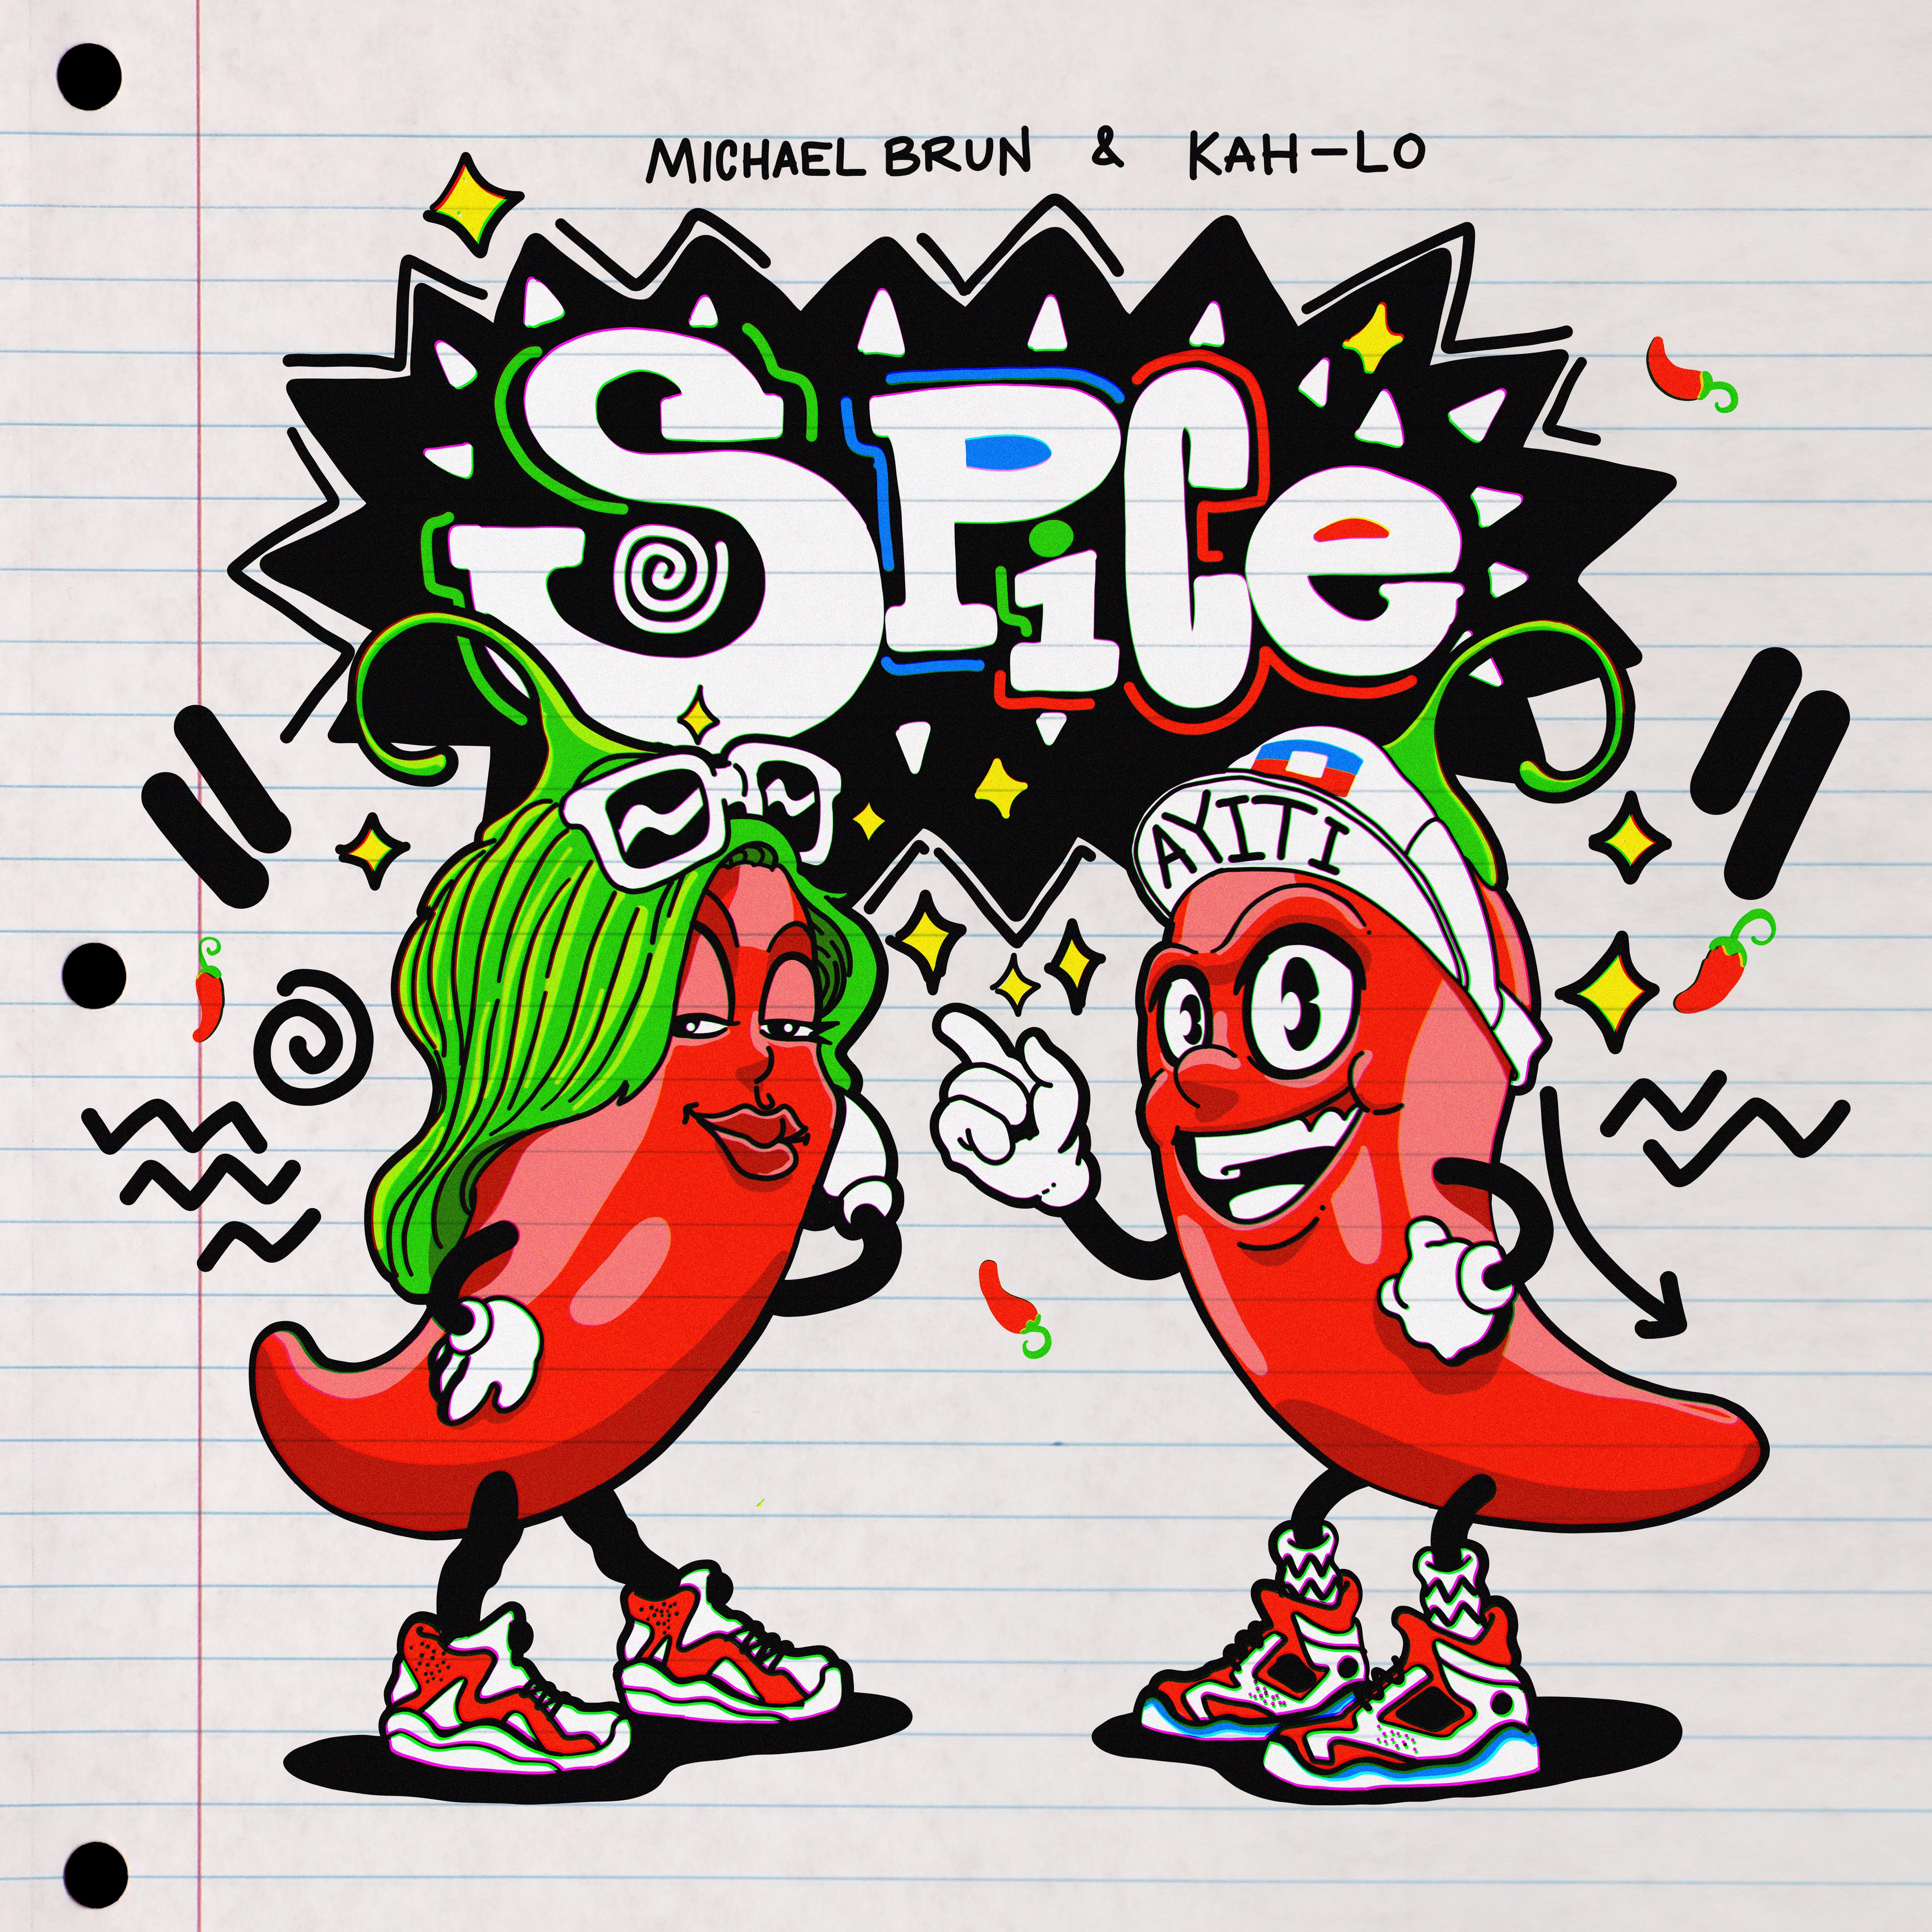 Michael Brun and Kah-Lo Collaborate on Bass-Heavy Track ‘Spice’